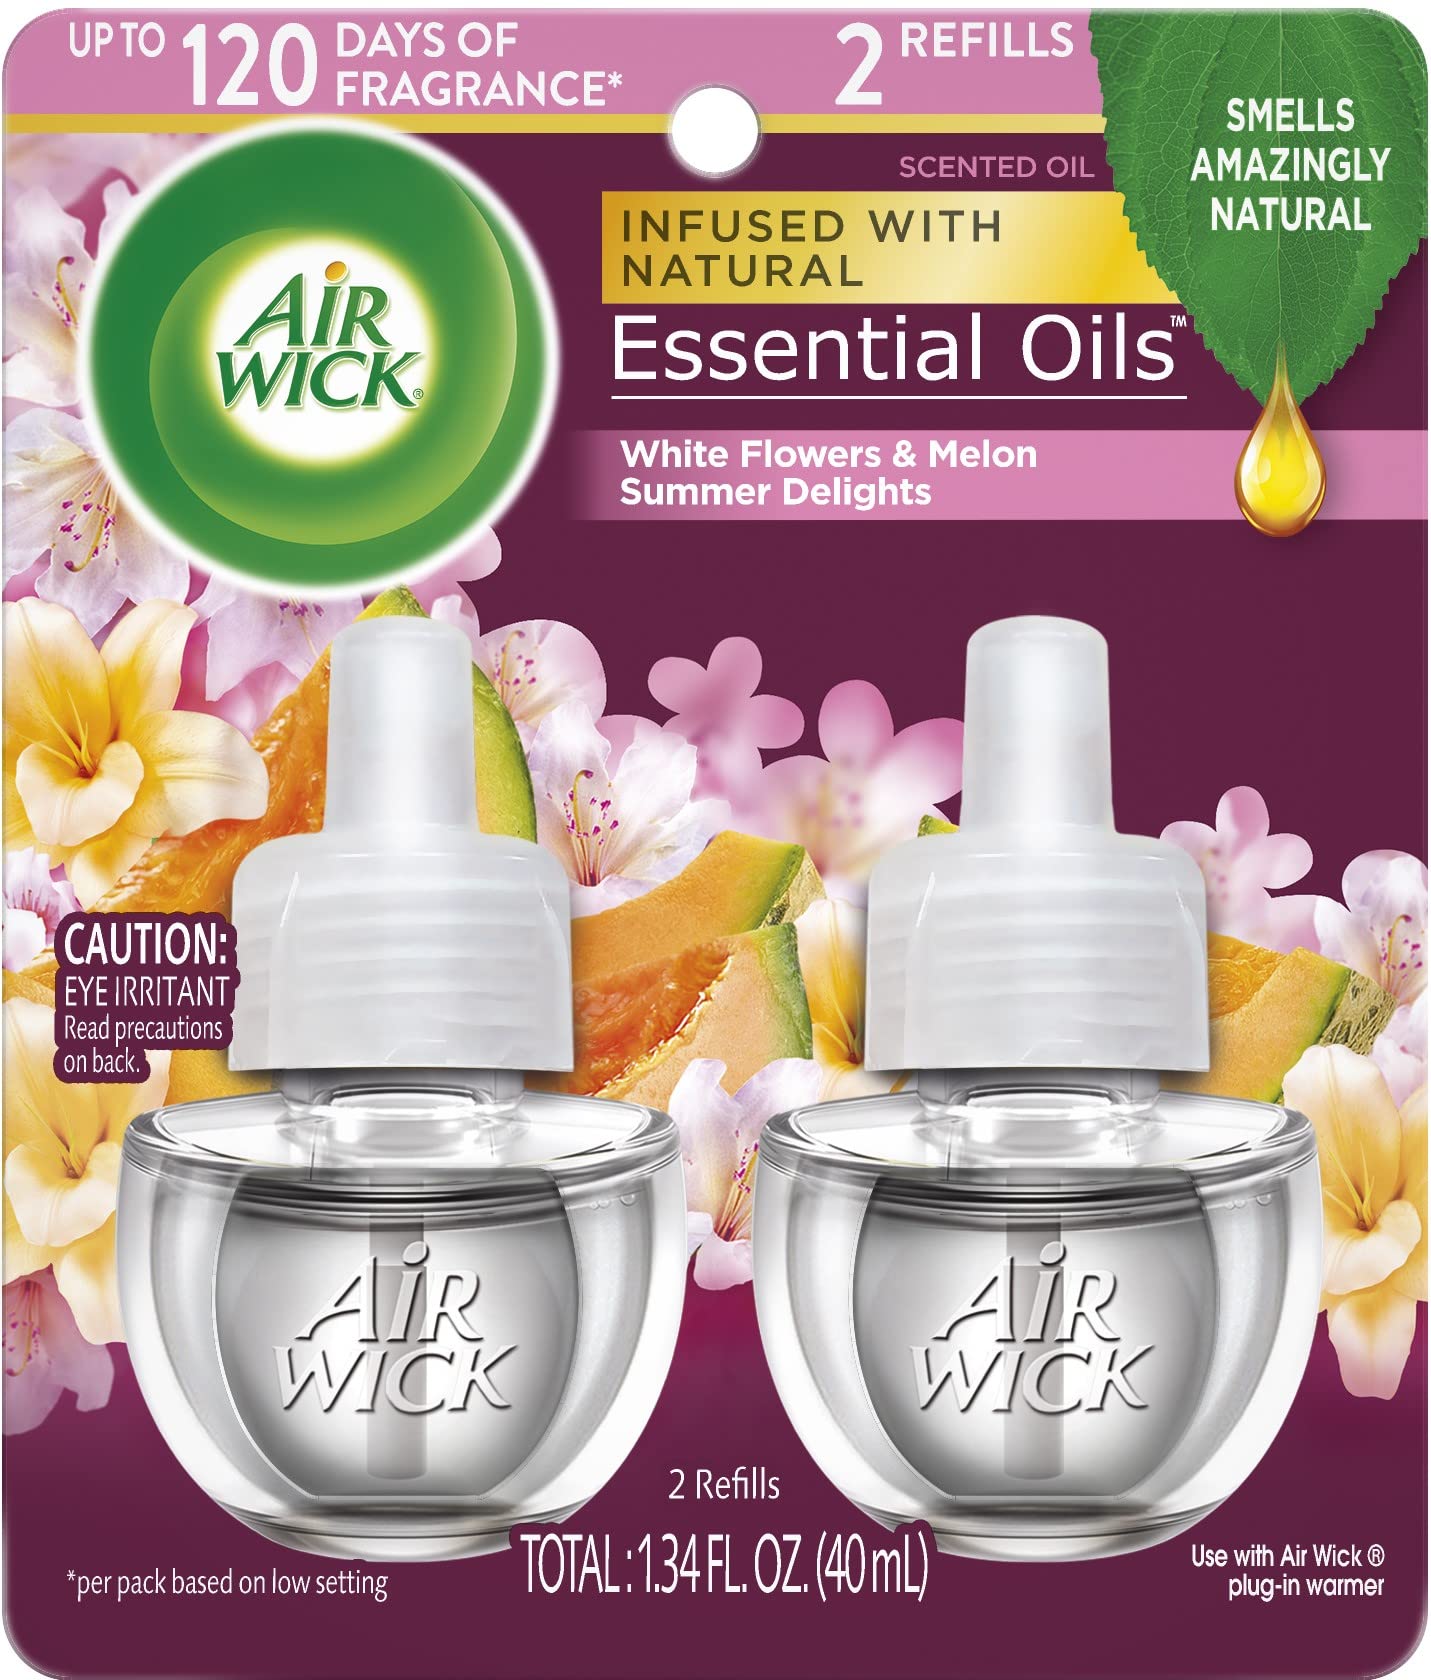 Air Wick Summer Delights Scented Oil Refills, 3 ct / 2.01 fl oz - Foods Co.